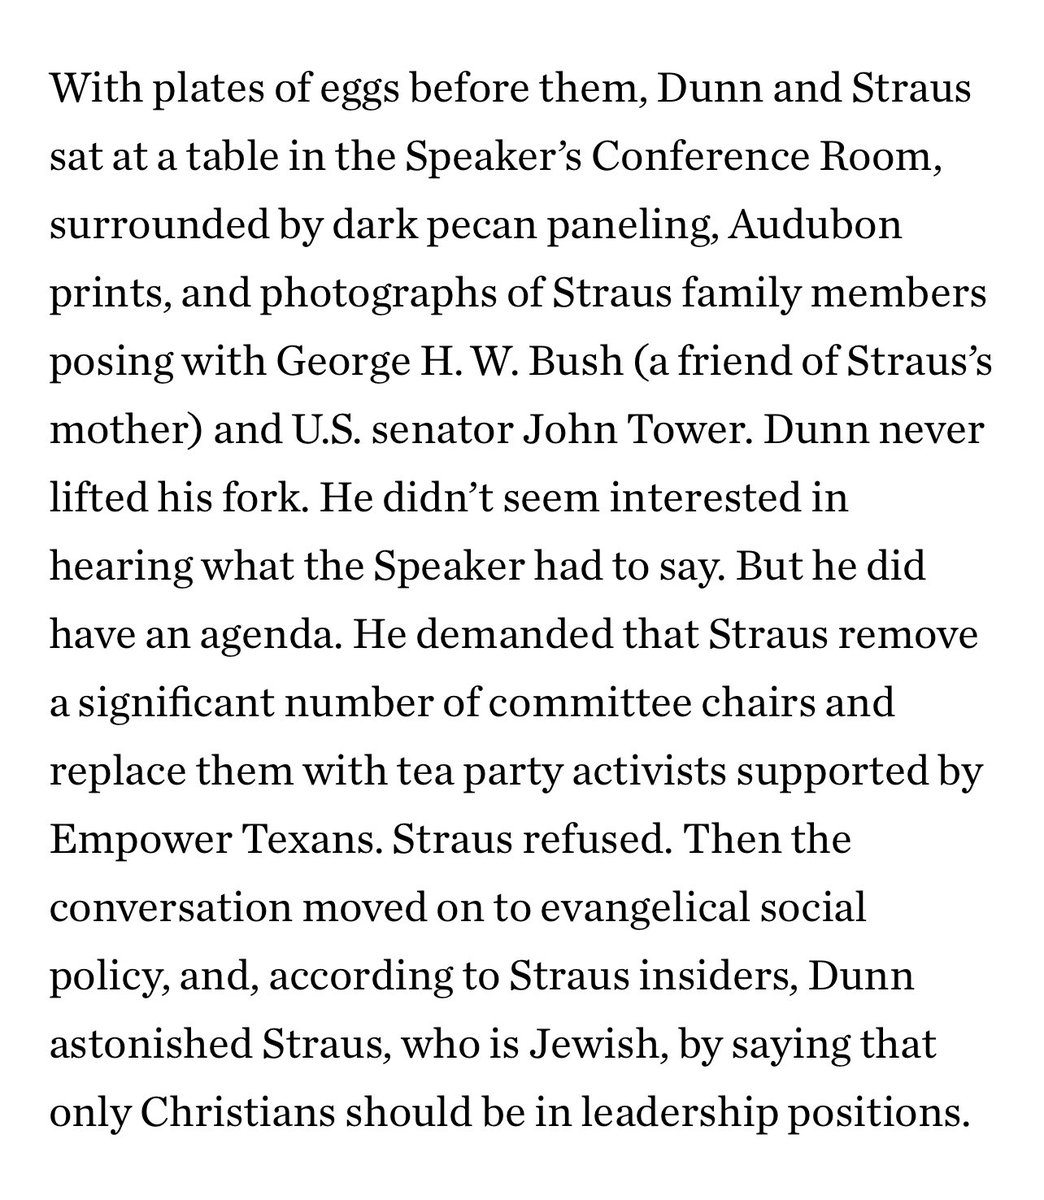 @GregAbbott_TX @stevefortx @DadePhelan @CoveyTX Straus says @rgratcliffe’s account of his meeting with Tim Dunn, in which Dunn called on Straus to put only Christians in leadership, is accurate. “It was a pretty unsatisfactory meeting. We never met again,” Straus says. texasmonthly.com/news-politics/… #txlege